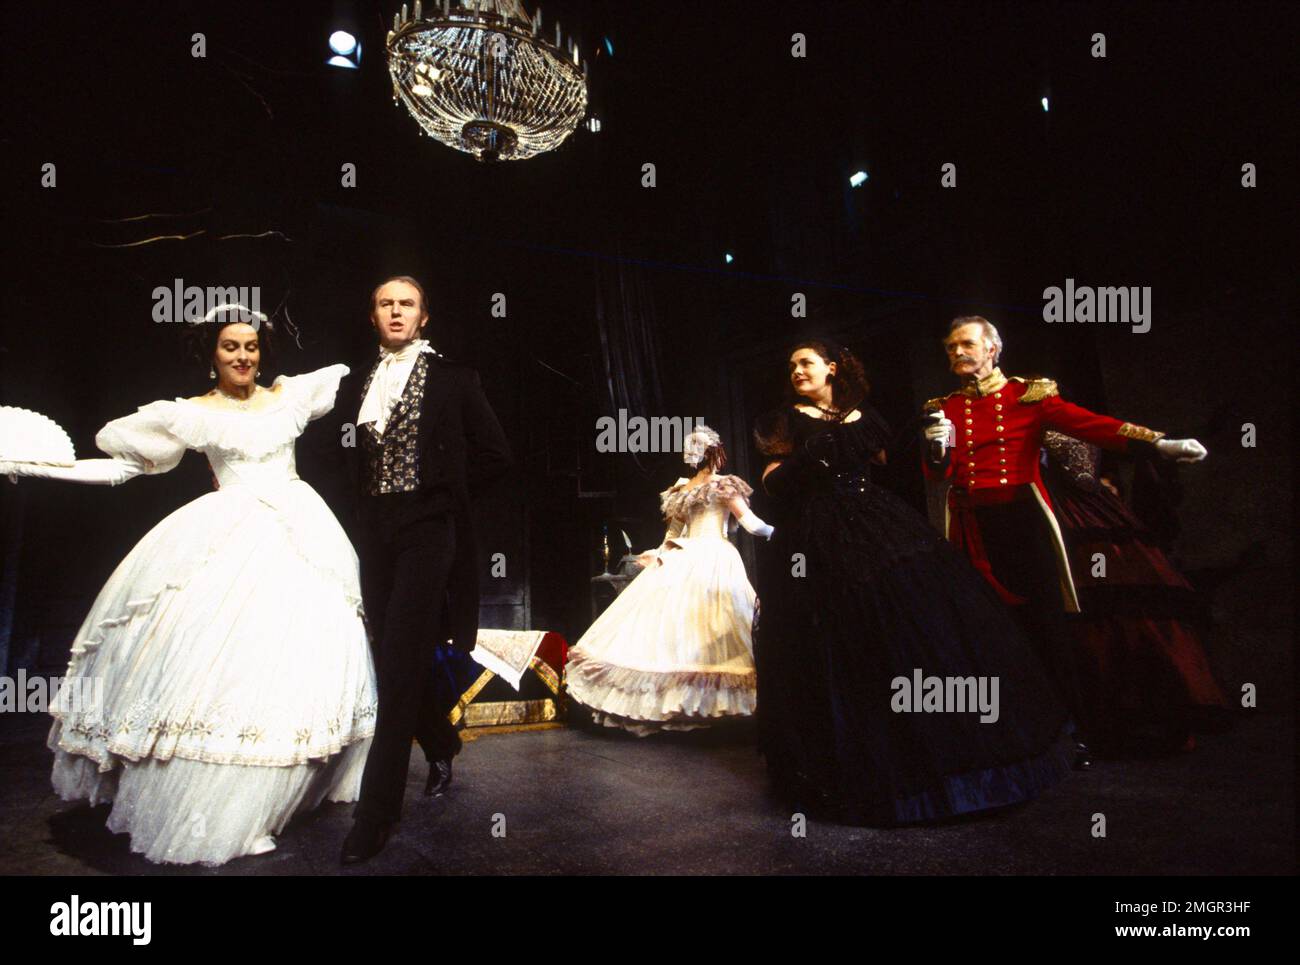 2nd left: Tim Pigott-Smith (Mr Rochester) in JANE EYRE by Charlotte Bronte at the Playhouse Theatre, London WC2  07/12/1993  adapted for the stage by Fay Weldon  design: Lez Brotherston  lighting: Nick Beadle  director: Helena Kaut-Howson Stock Photo